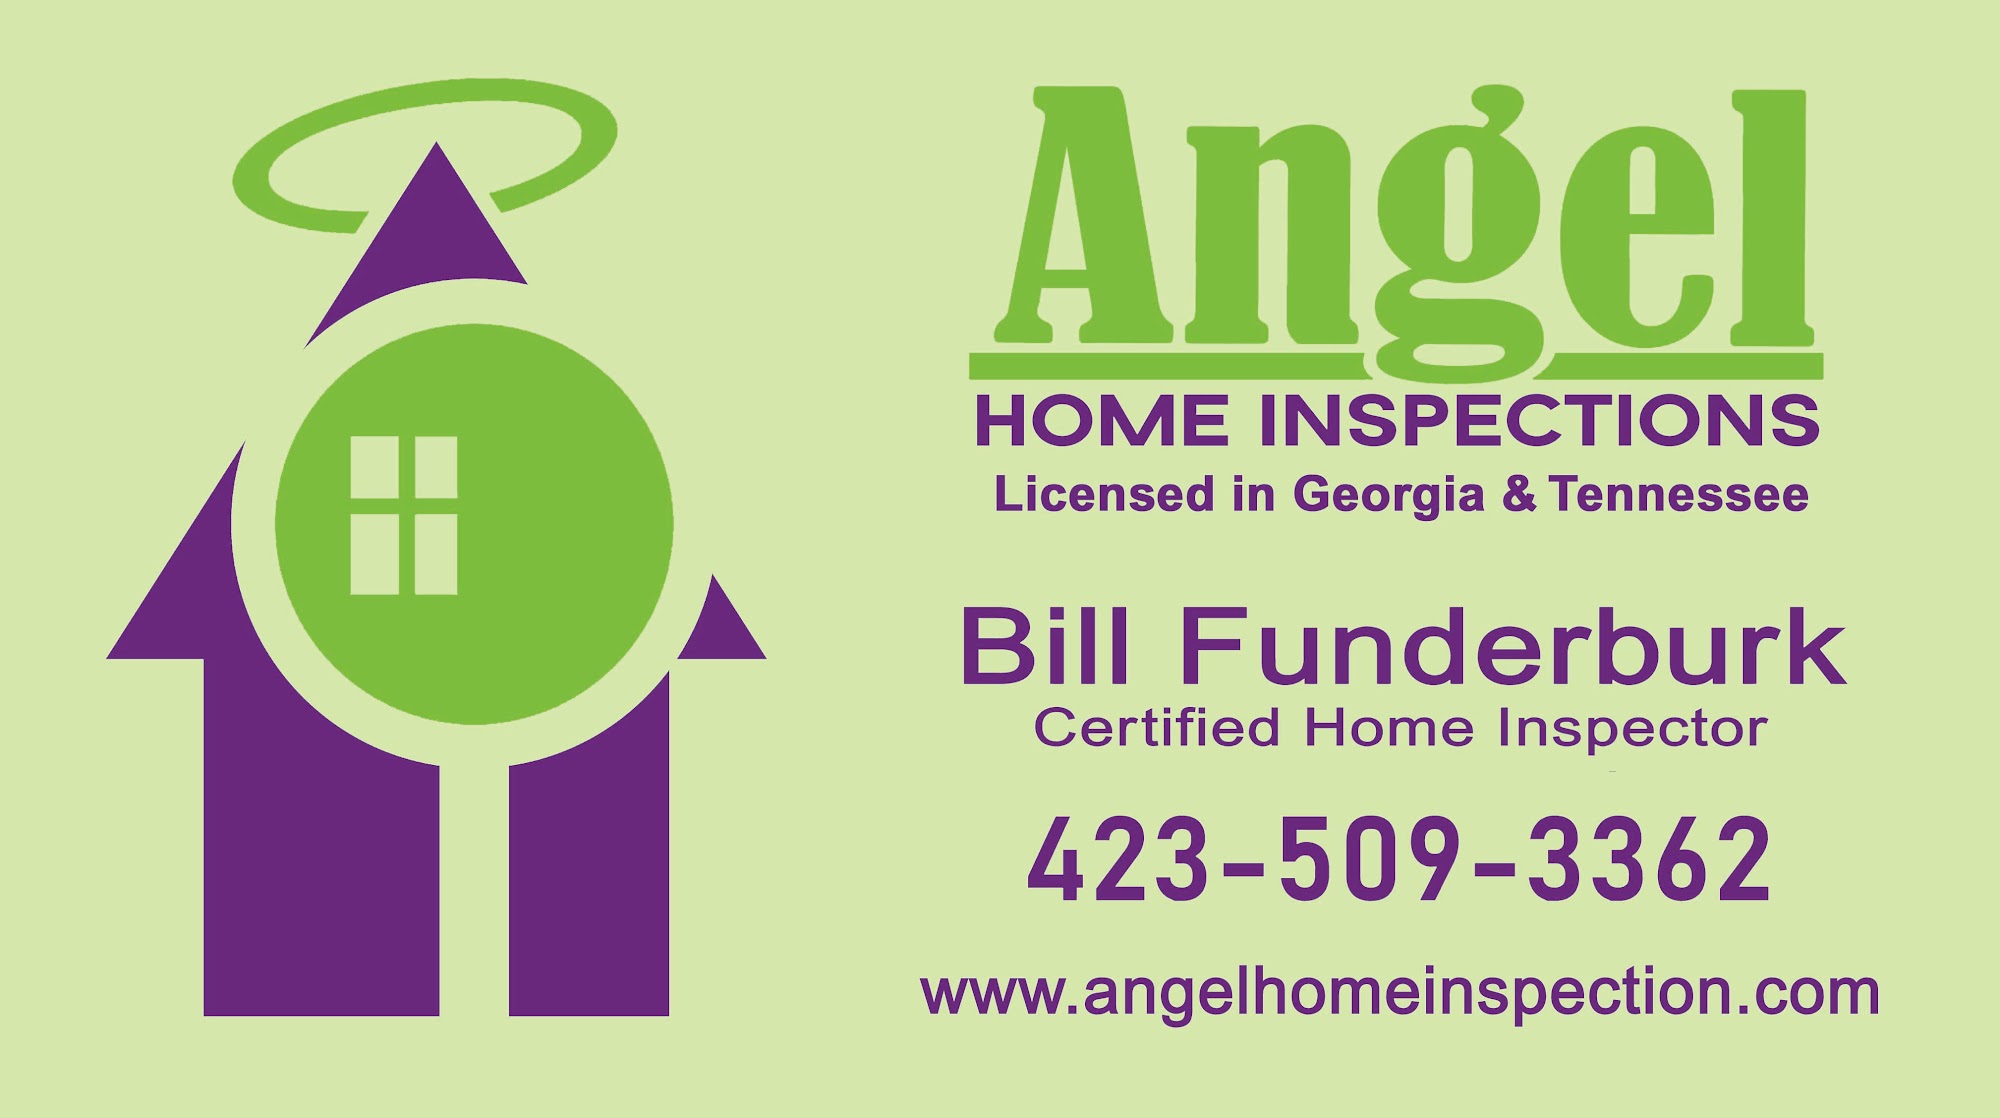 Angel Home Inspections 530 Lakeshore Cove Dr, Fort Oglethorpe Georgia 30742